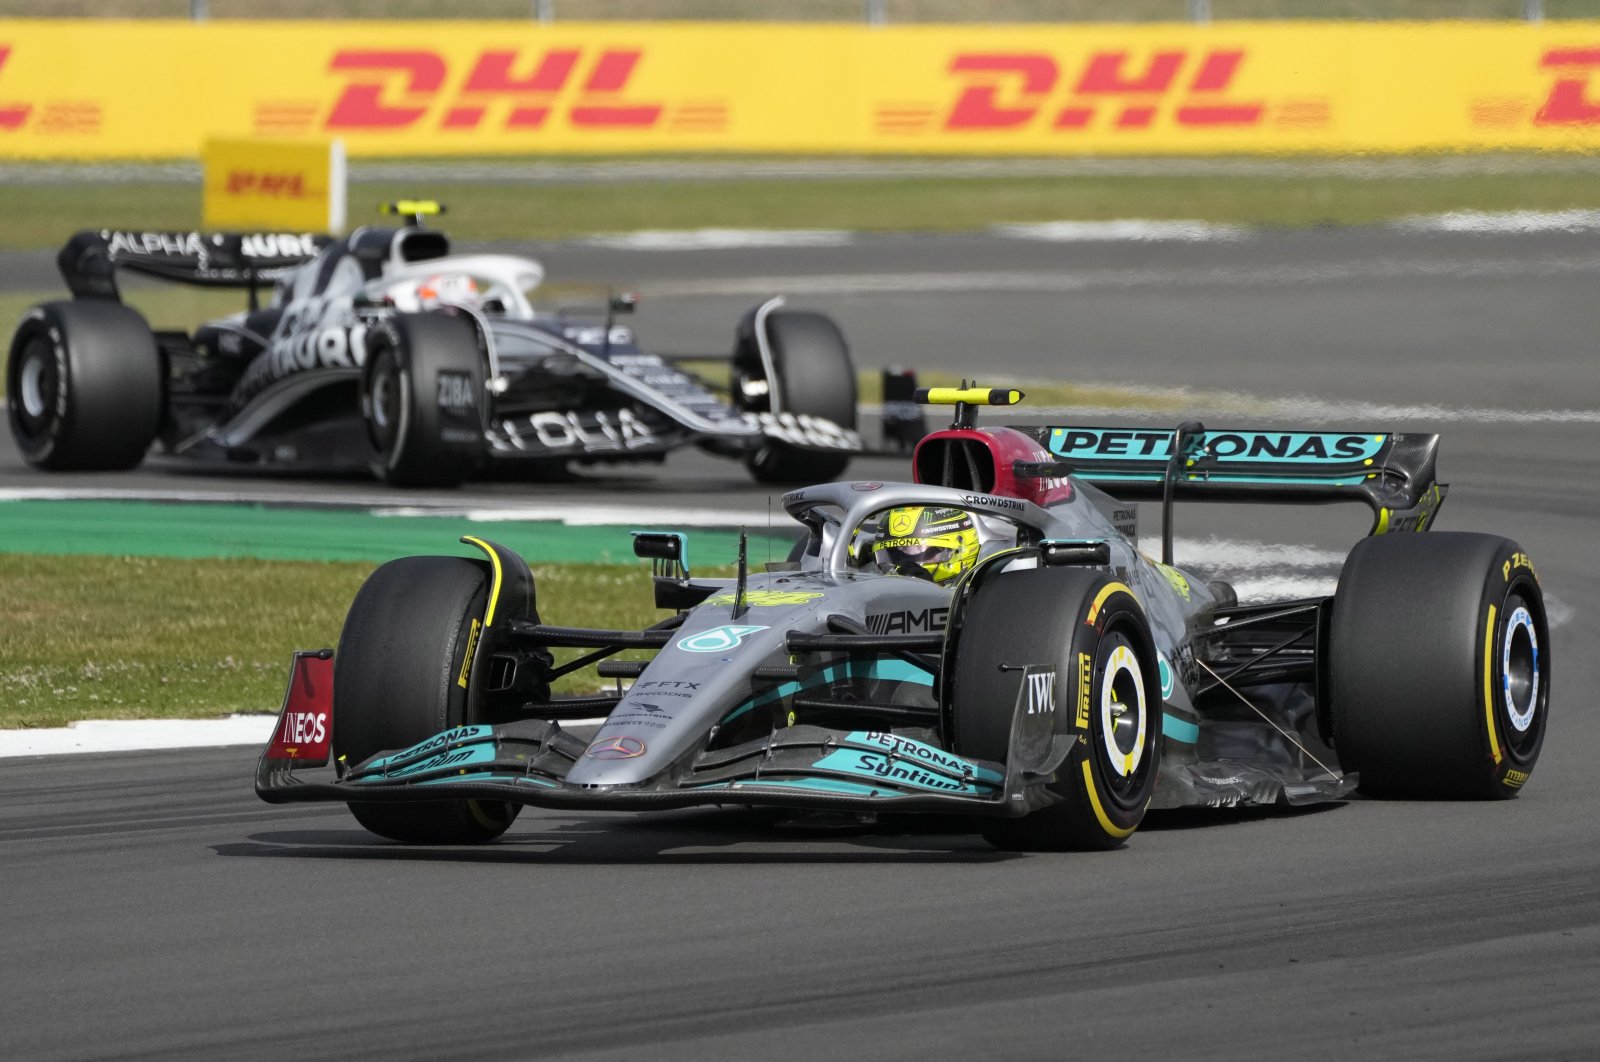 Mercedes driver Lewis Hamilton steers his car during the British F1 GP, Silverstone, England, July 3, 2022. (AP Photo)